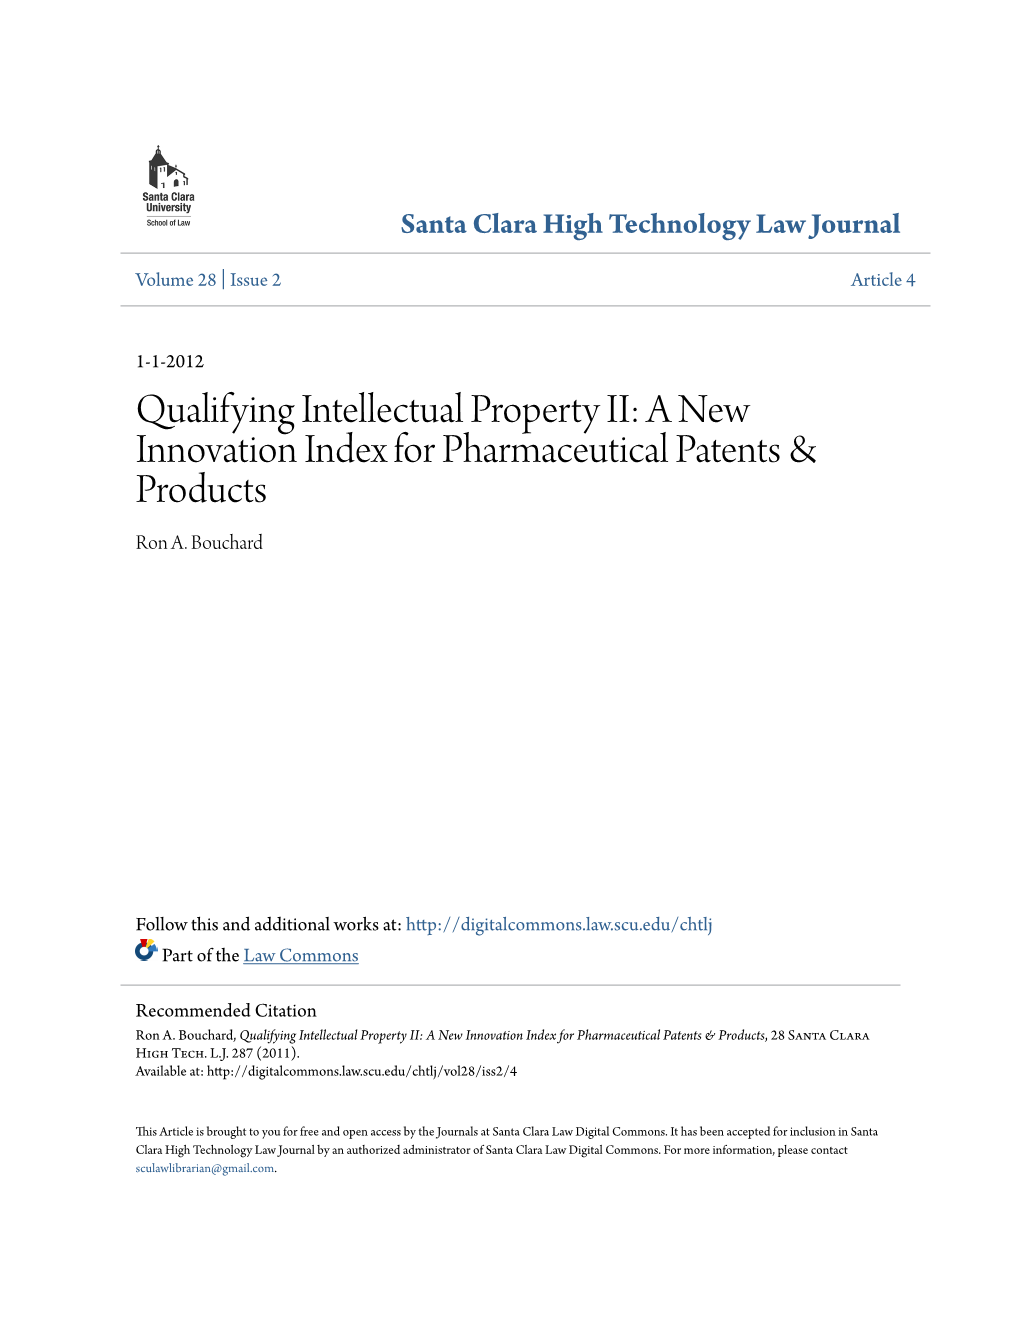 A New Innovation Index for Pharmaceutical Patents & Products